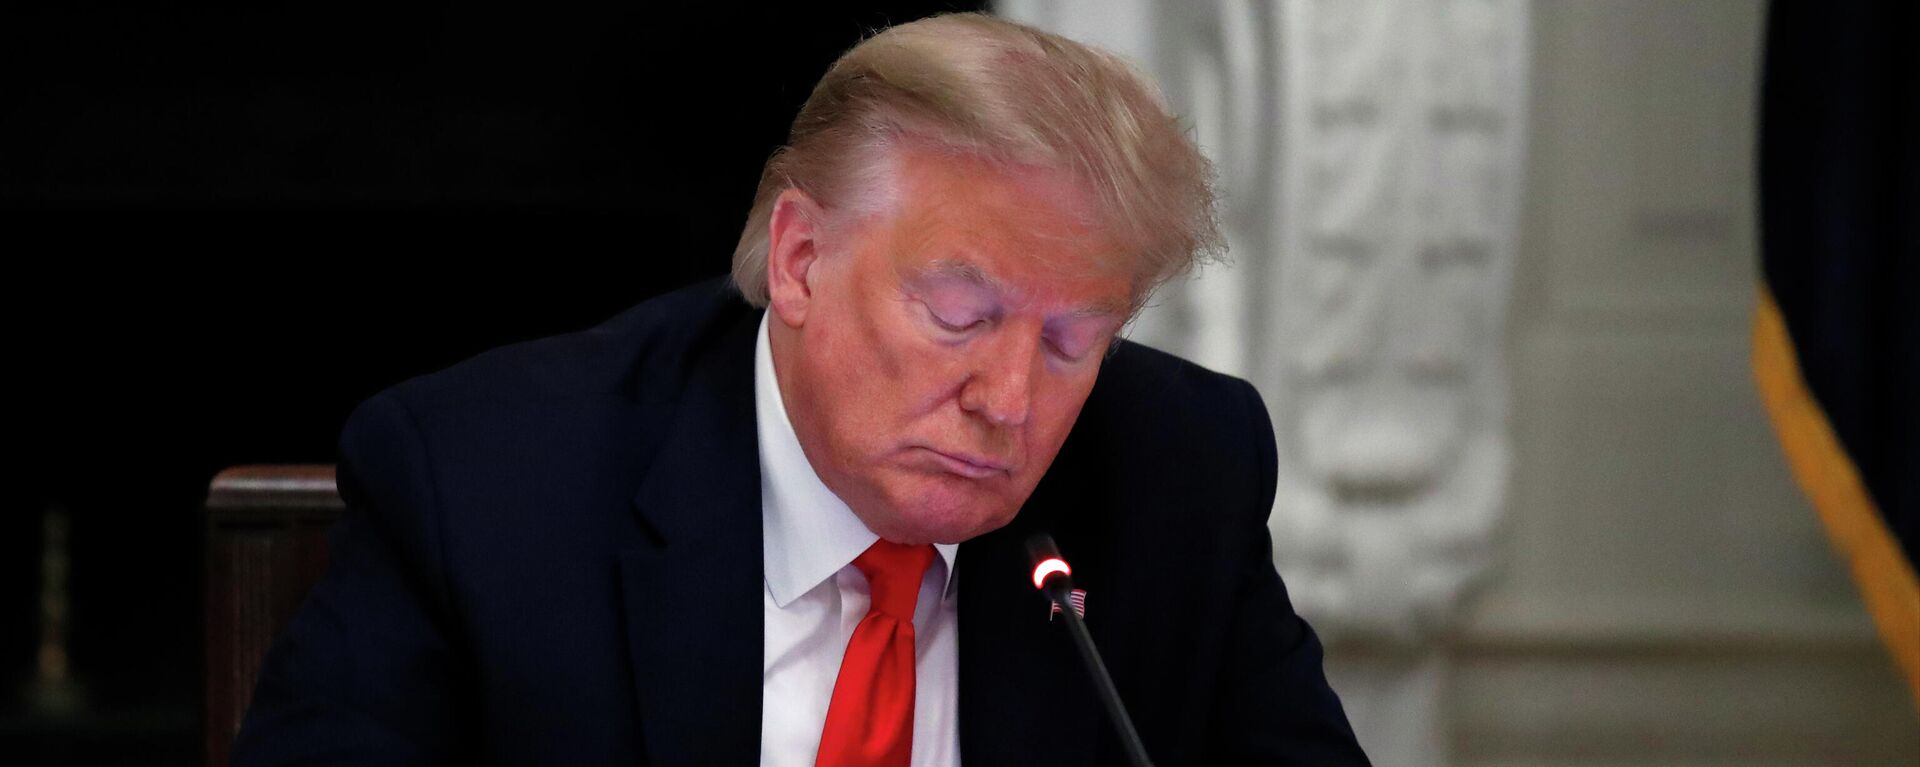  In this Thursday, June 18, 2020 file photo, President Donald Trump looks at his phone during a roundtable with governors on the reopening of America's small businesses, in the State Dining Room of the White House in Washington. - Sputnik International, 1920, 20.01.2022